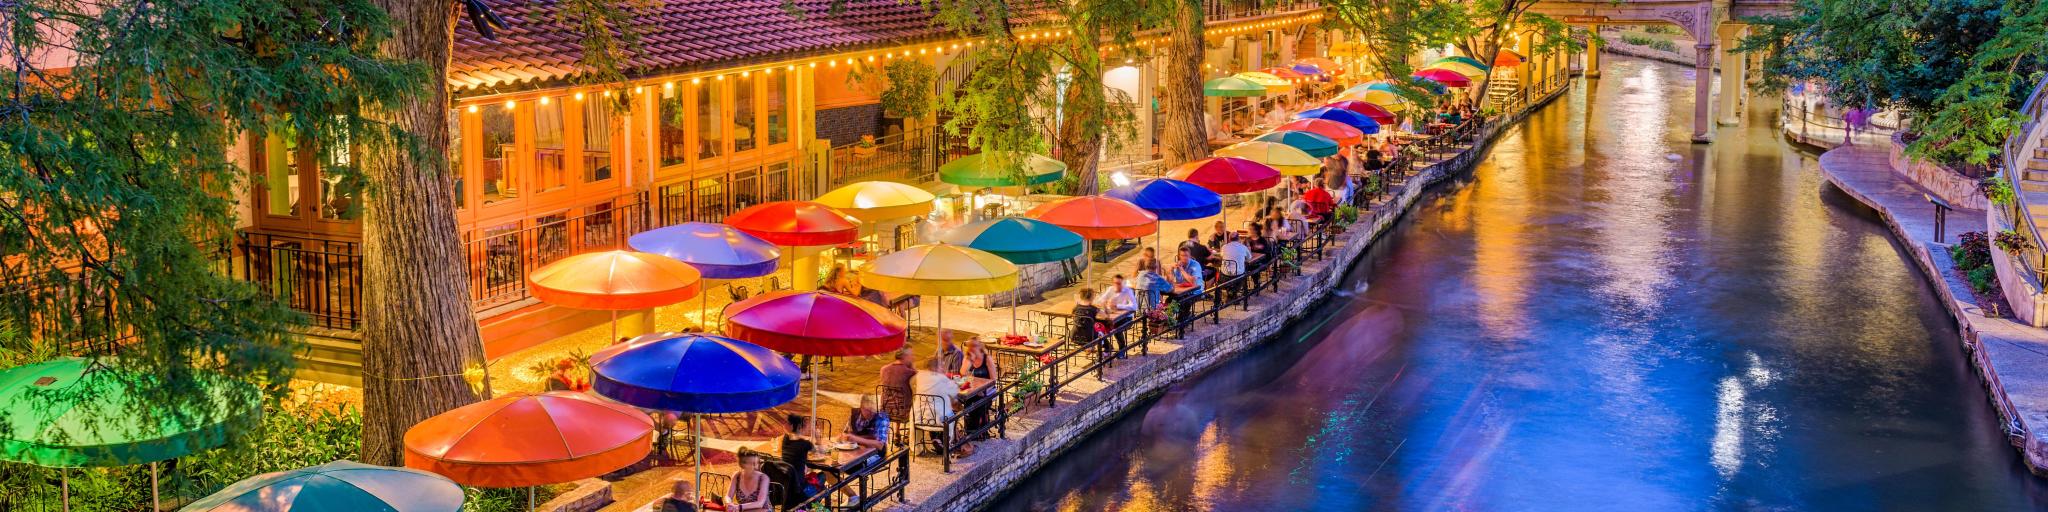 San Antonio, Texas, USA cityscape at the River Walk as the evening falls. There are colorful umbrellas on the riverside, with tables.